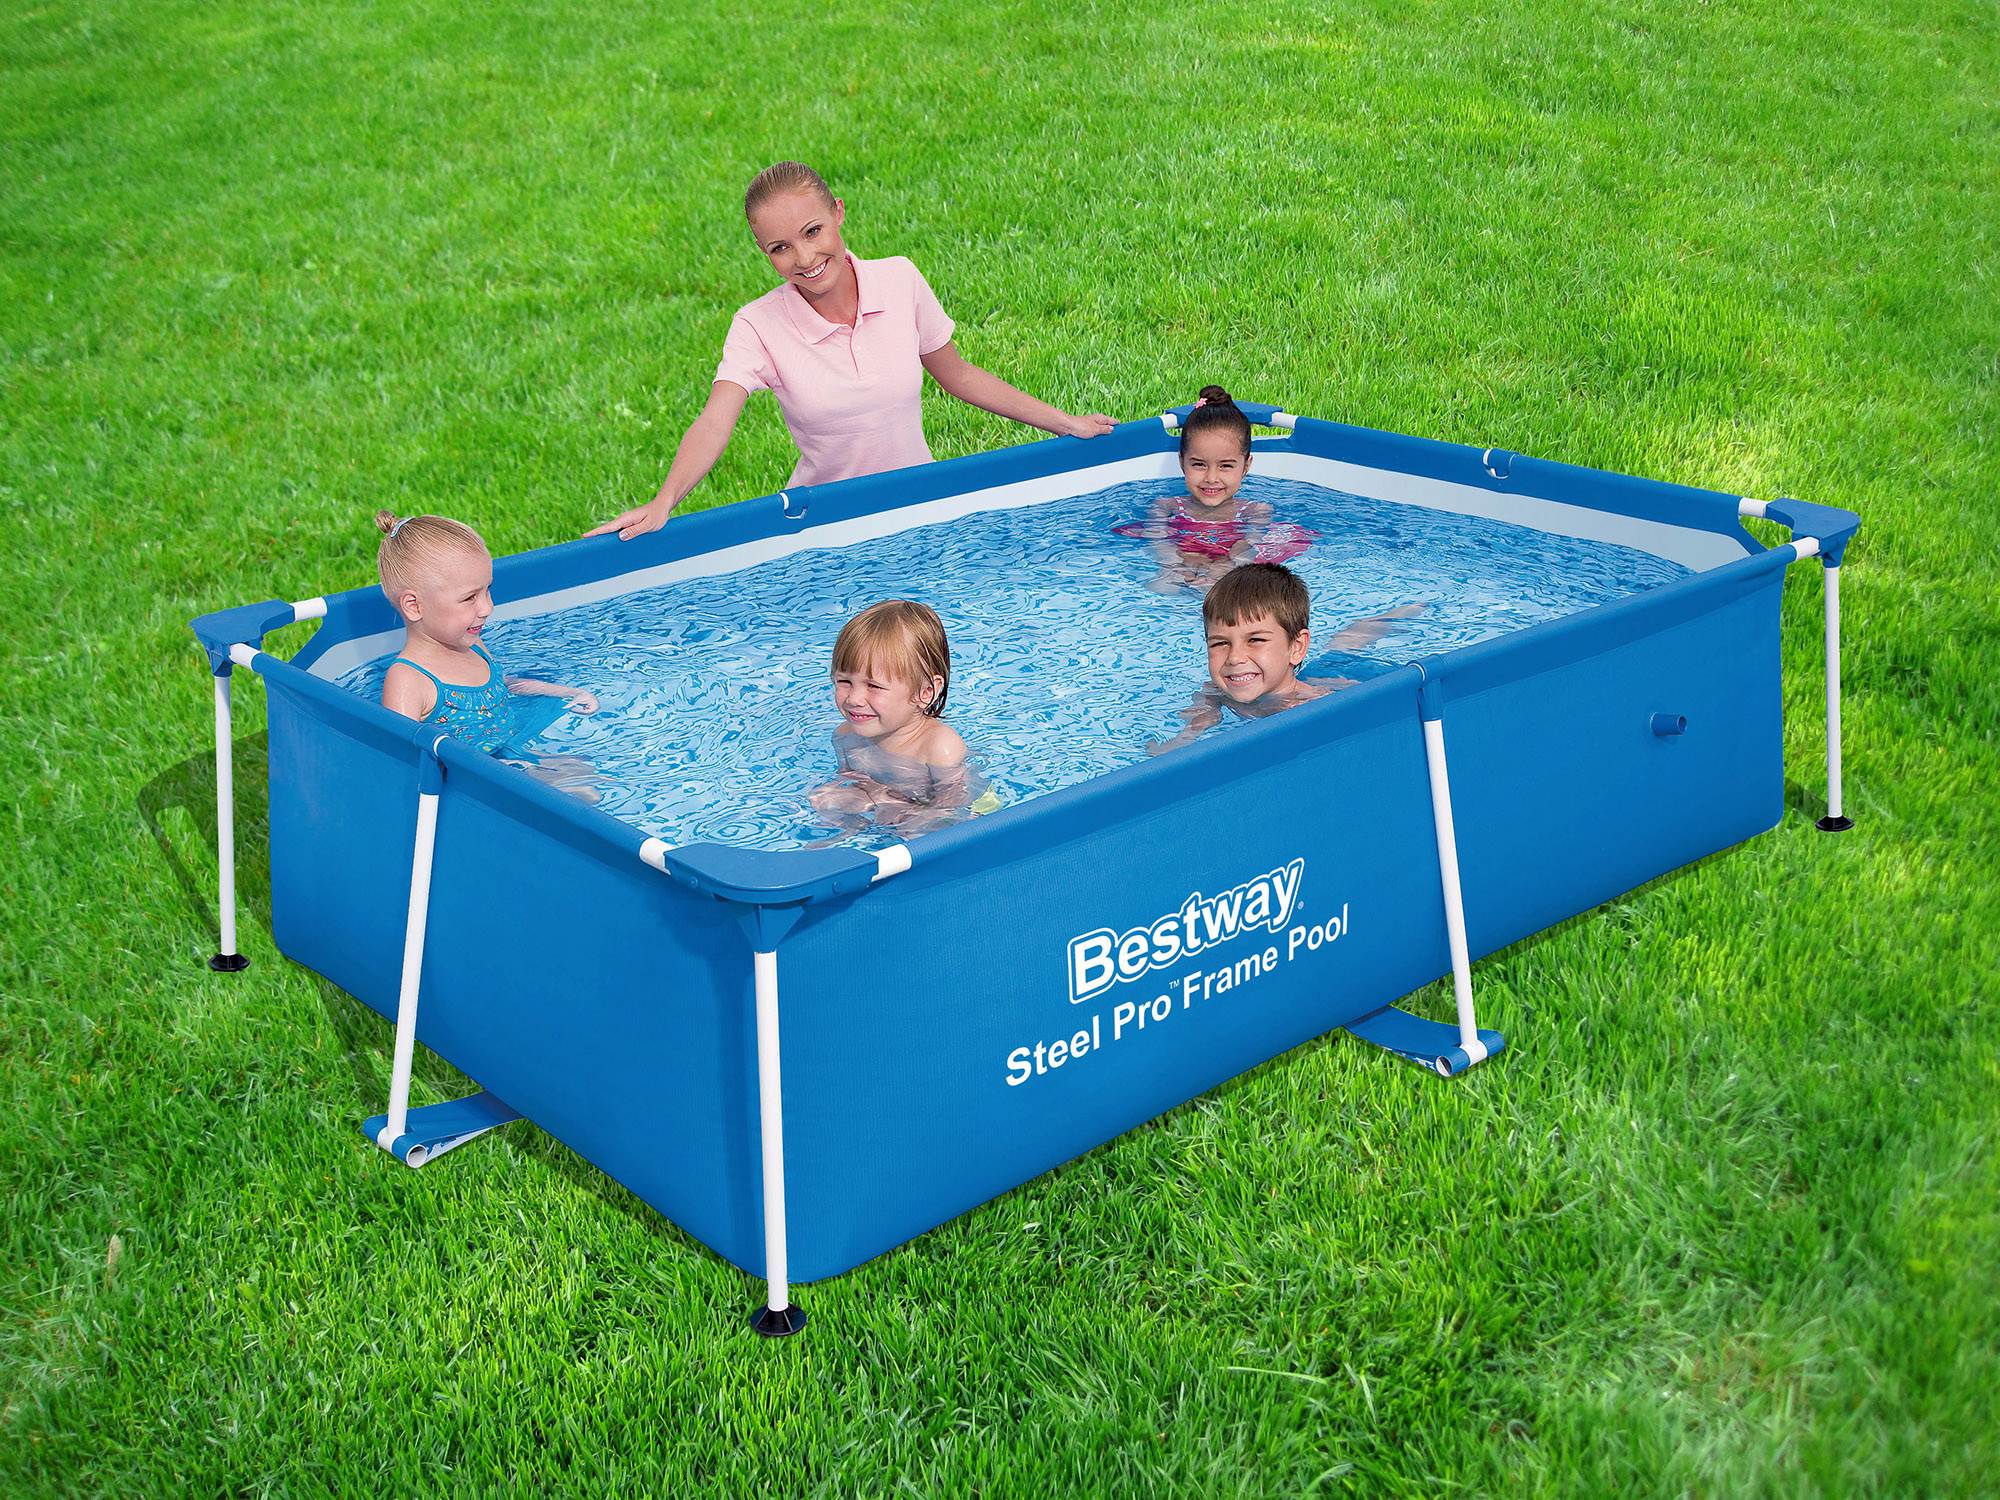 Bestway Splash Metal Pools Pool Rectangle department Above-Ground x Frame 10-ft 6.5-ft at the in Above-Ground 26-in Frame x